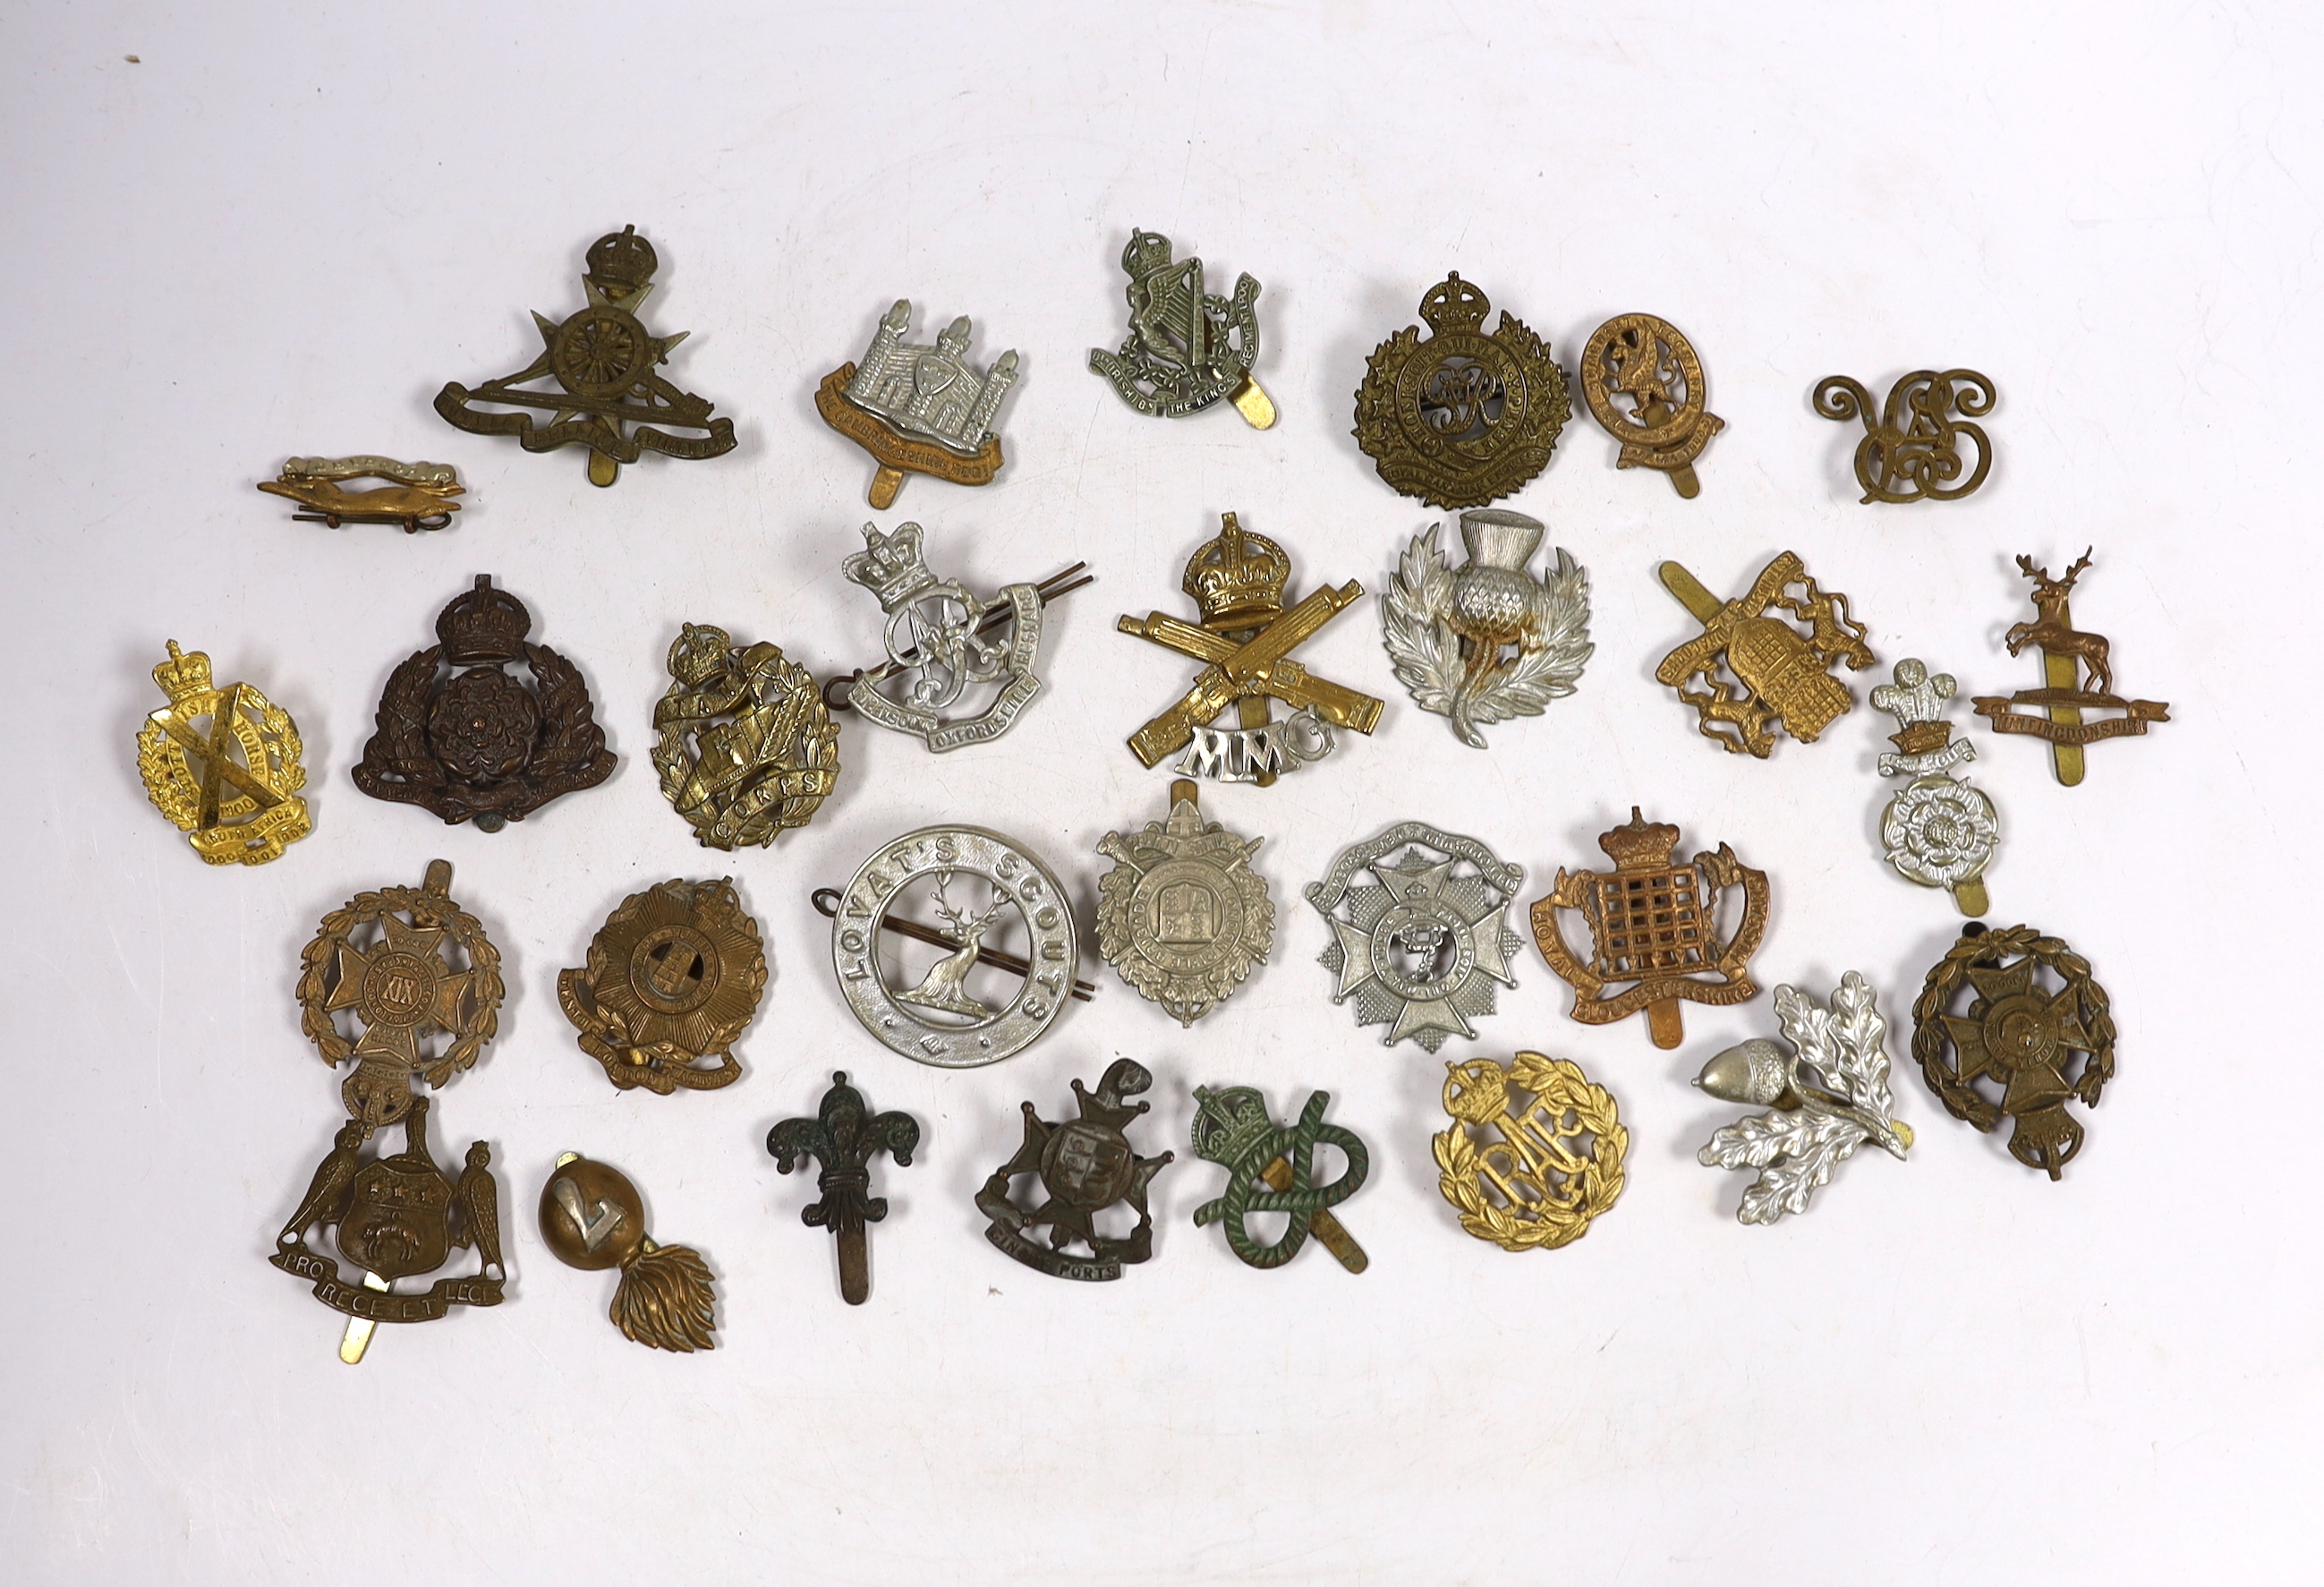 Thirty military cap badges including Royal Canadian Engineers, Royal Gloucestershire Hussars, the Robin Hoods, RAF, the Cambridgeshire Regiment, Tank Corps, Huntingdonshire, Westminster Dragoons, Cinque Ports, Derbyshire